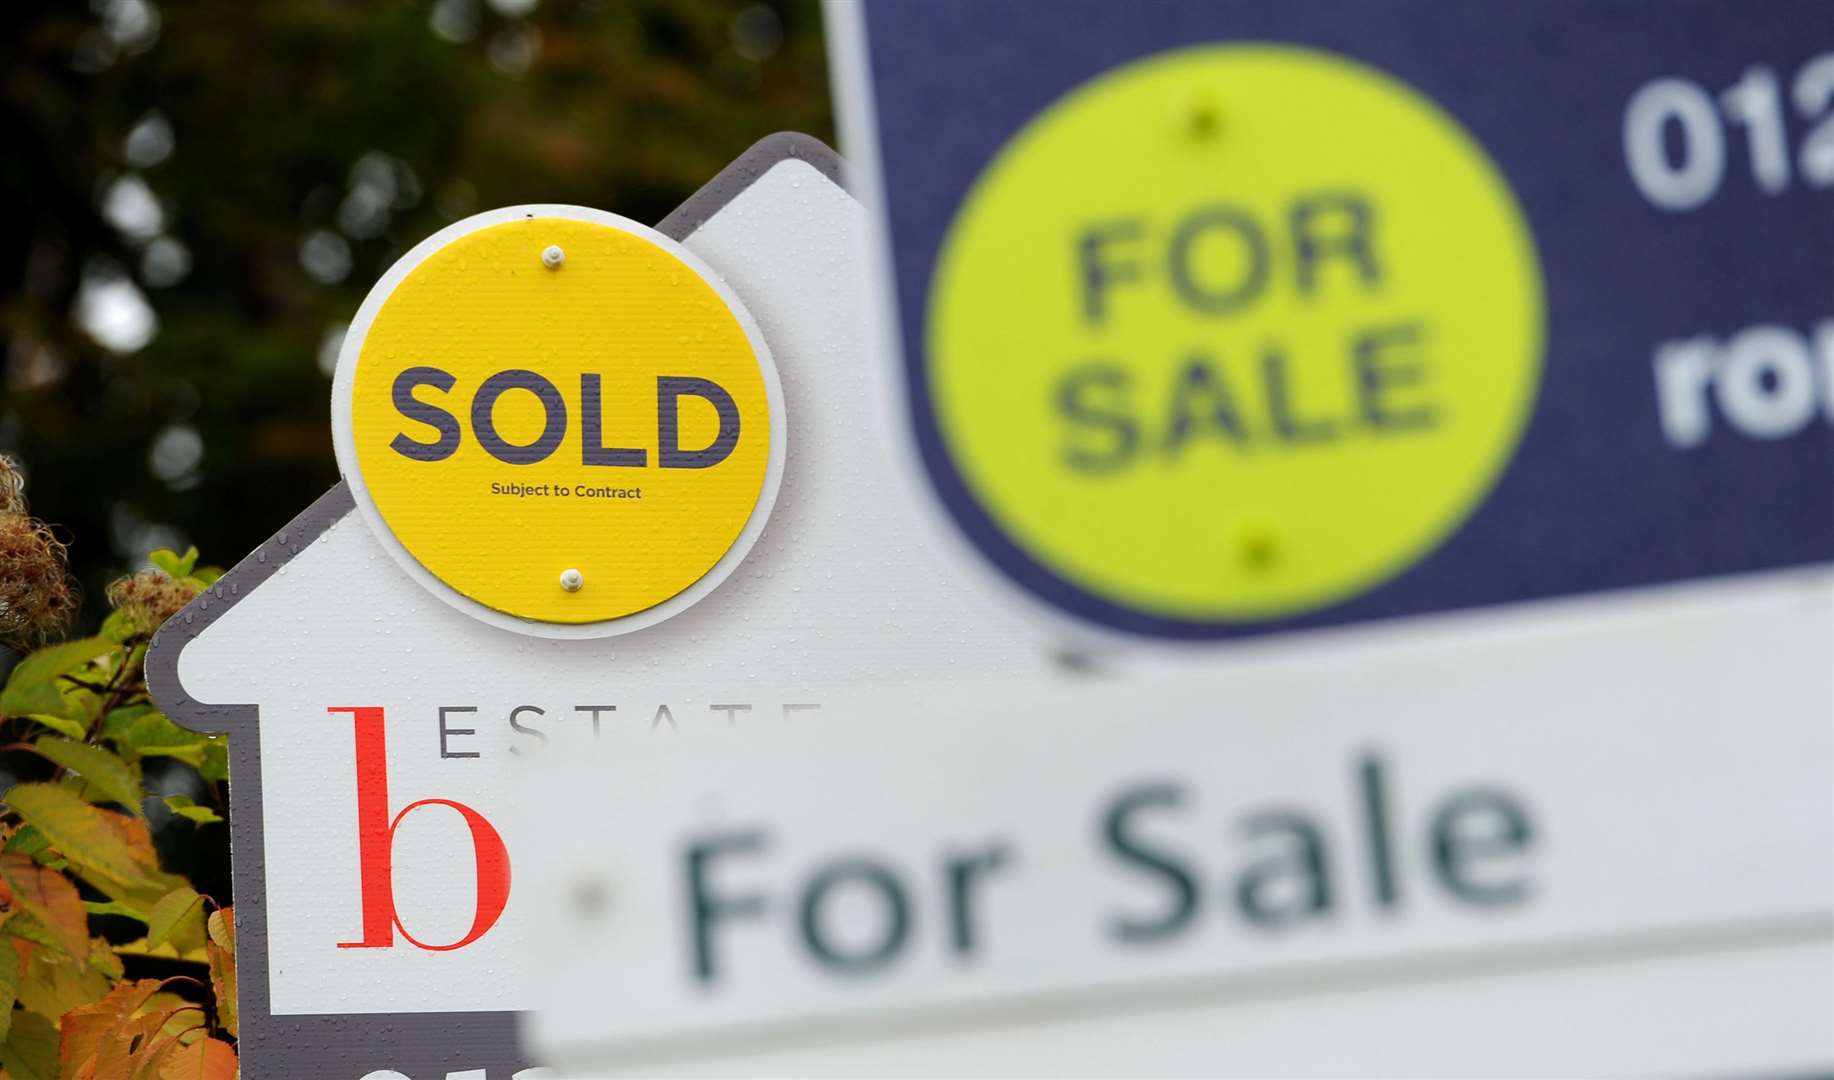 Zoopla claims cost-of-living pressures is driving home buyers away from the coast and towards towns and urban areas